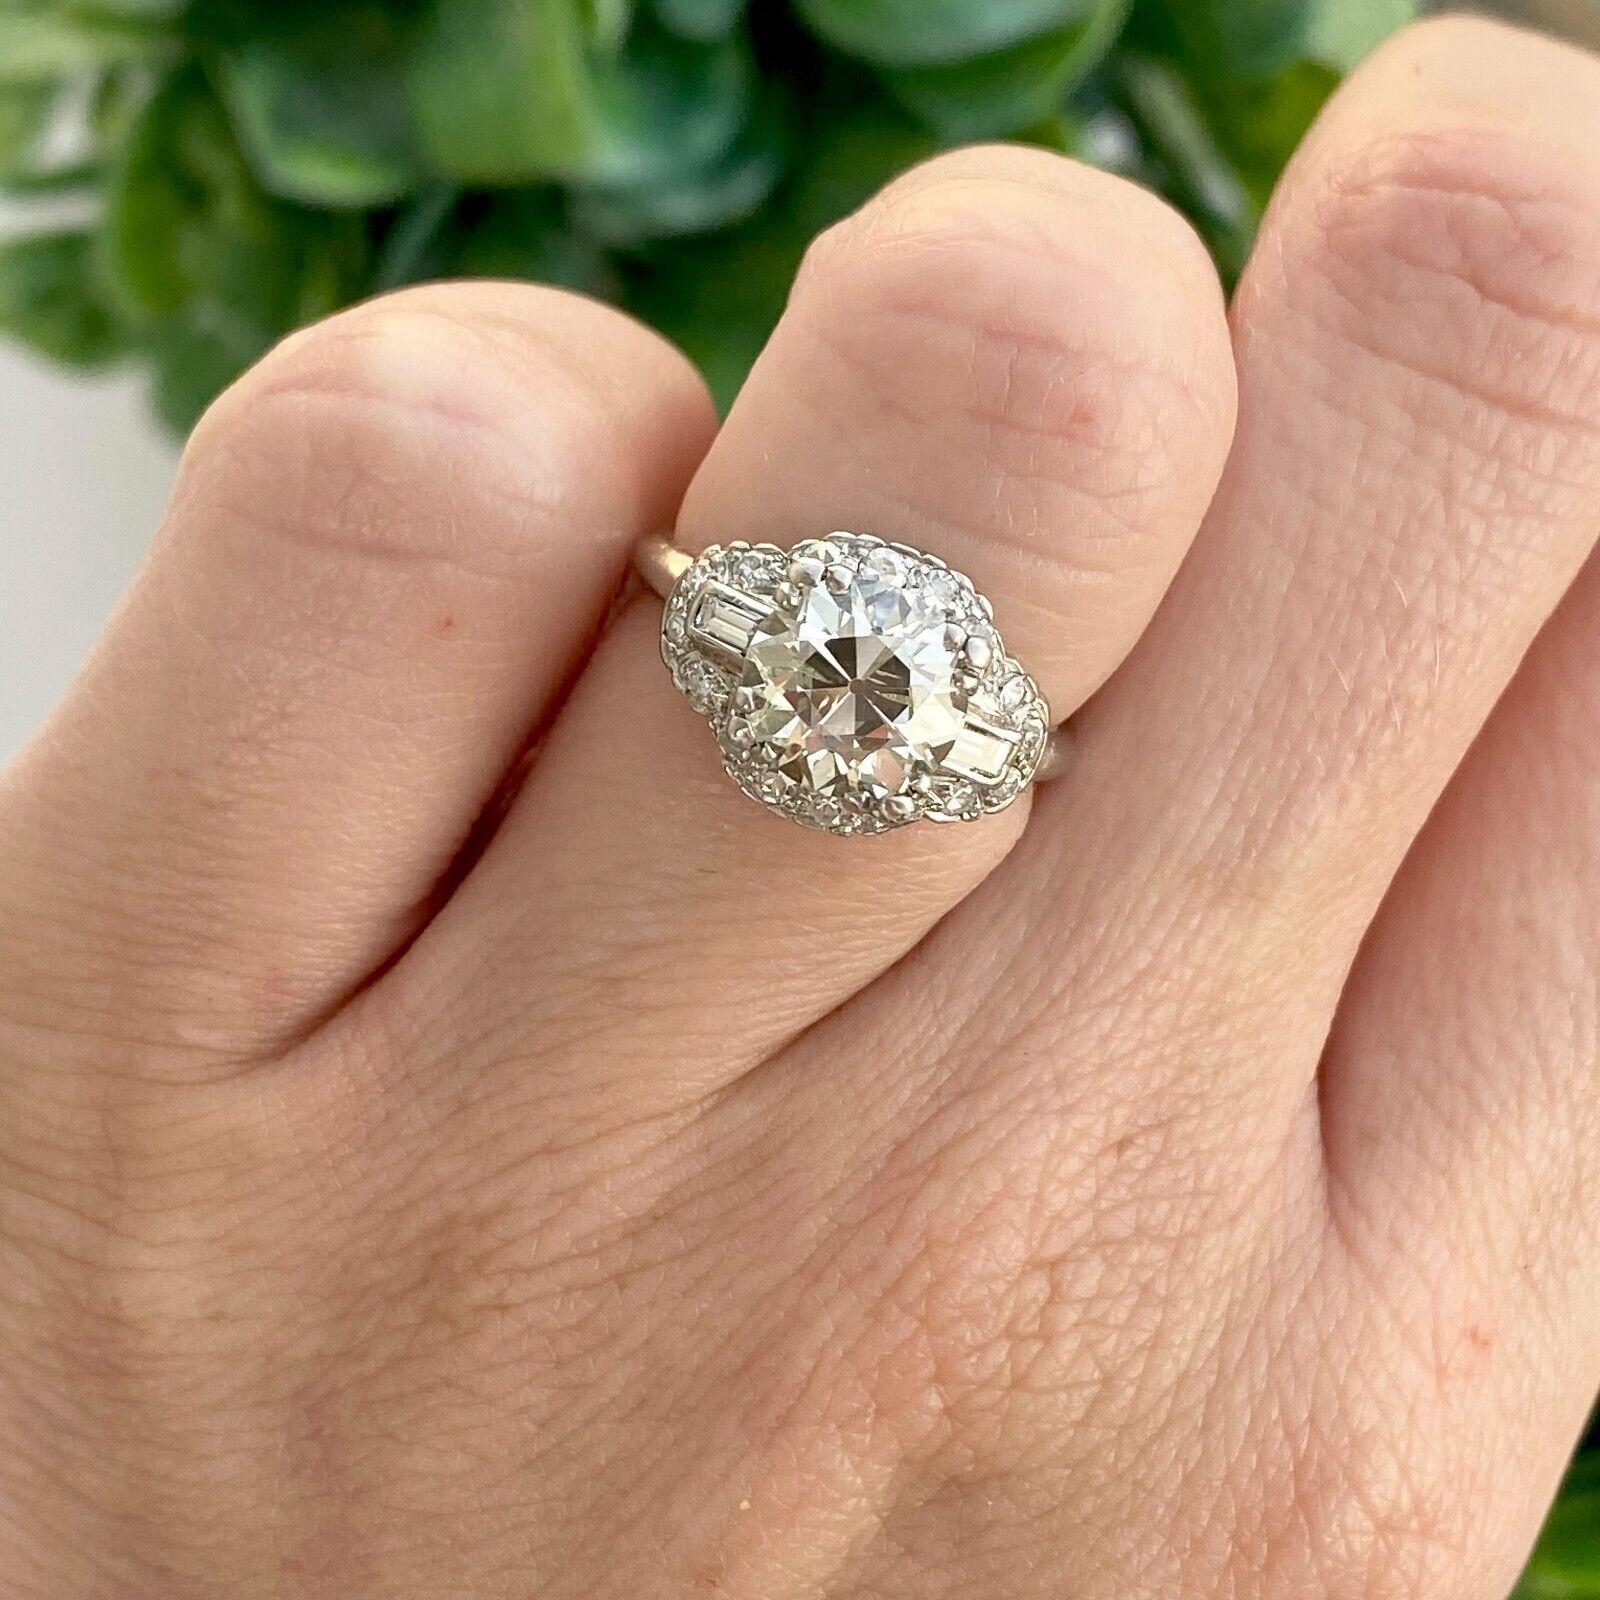 Item specifics
Seller Notes:
“GREAT CONDITION. COMES WITH UGS (EGL USA)CERTIFICATE; CENTER STONE: 2.12CT IJ SI2; SIDE STONES FG VS1-2”
Number of Diamonds:19
Main Stone Creation:Natural
Cut Grade:Excellent
Sizable:Yes
Main Stone